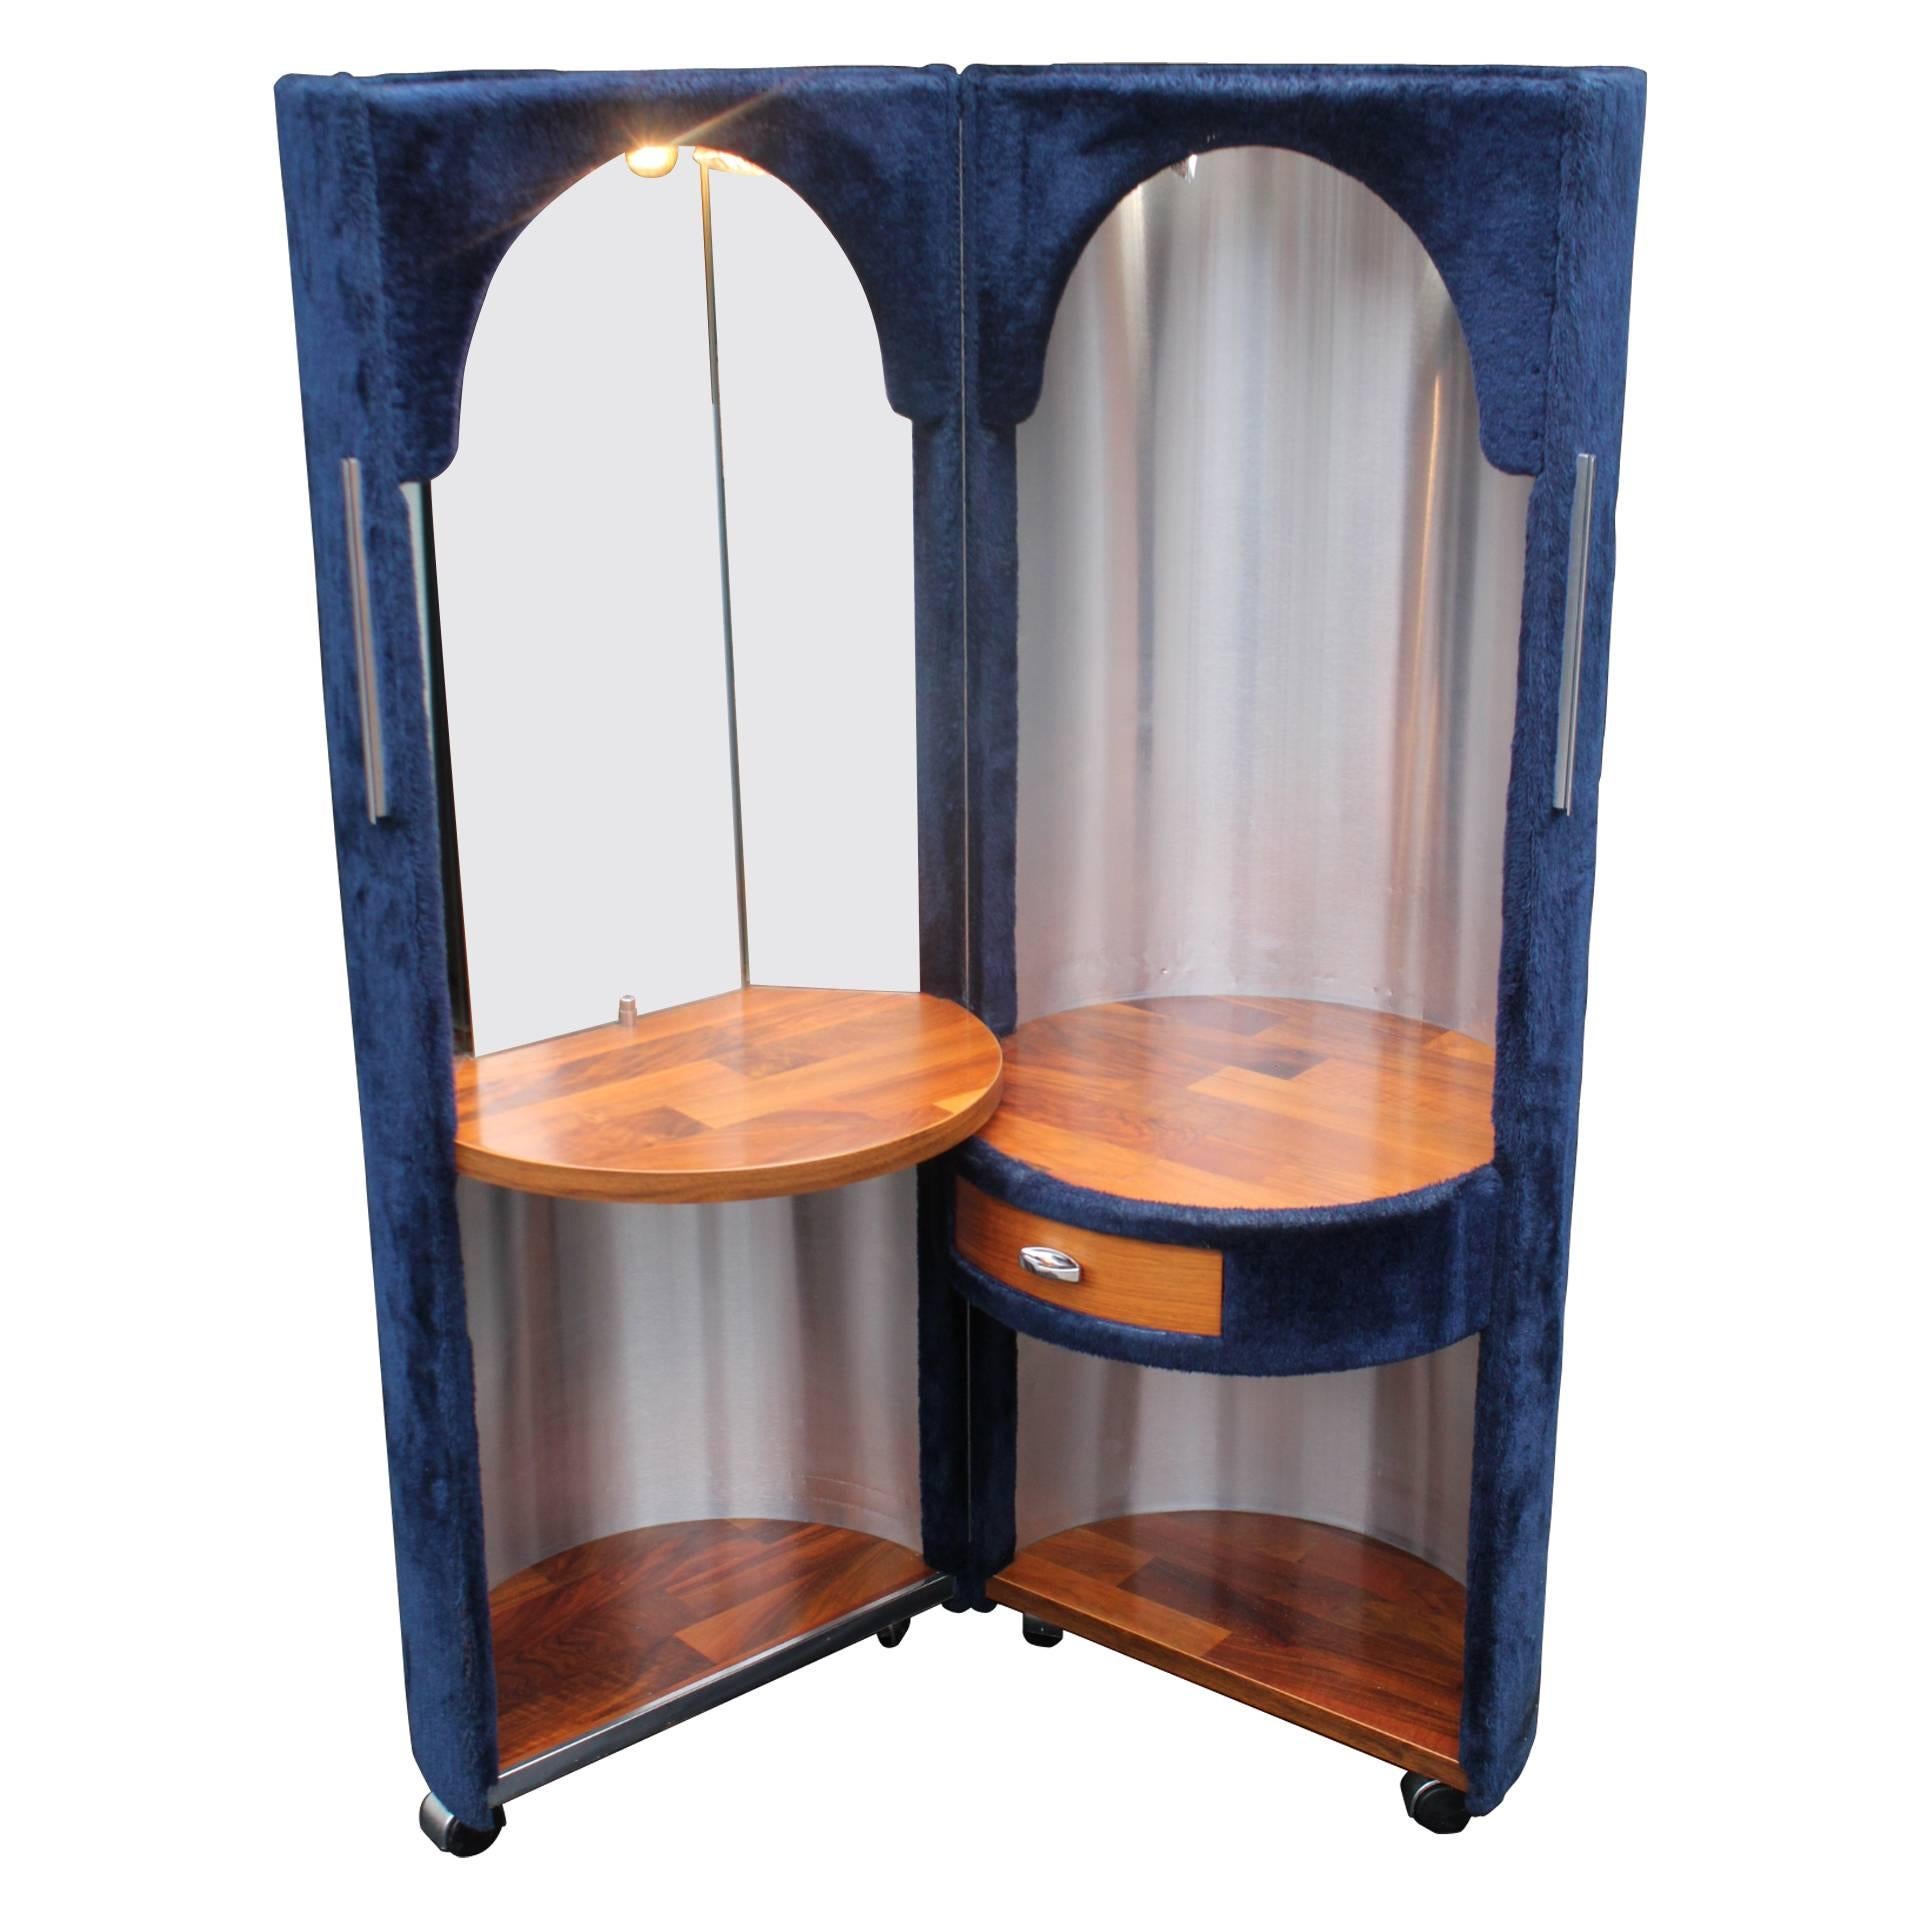 Italy Pop Design Round Mirrored Vanity Attributed to Poltrona Frau, 1970s  For Sale at 1stDibs